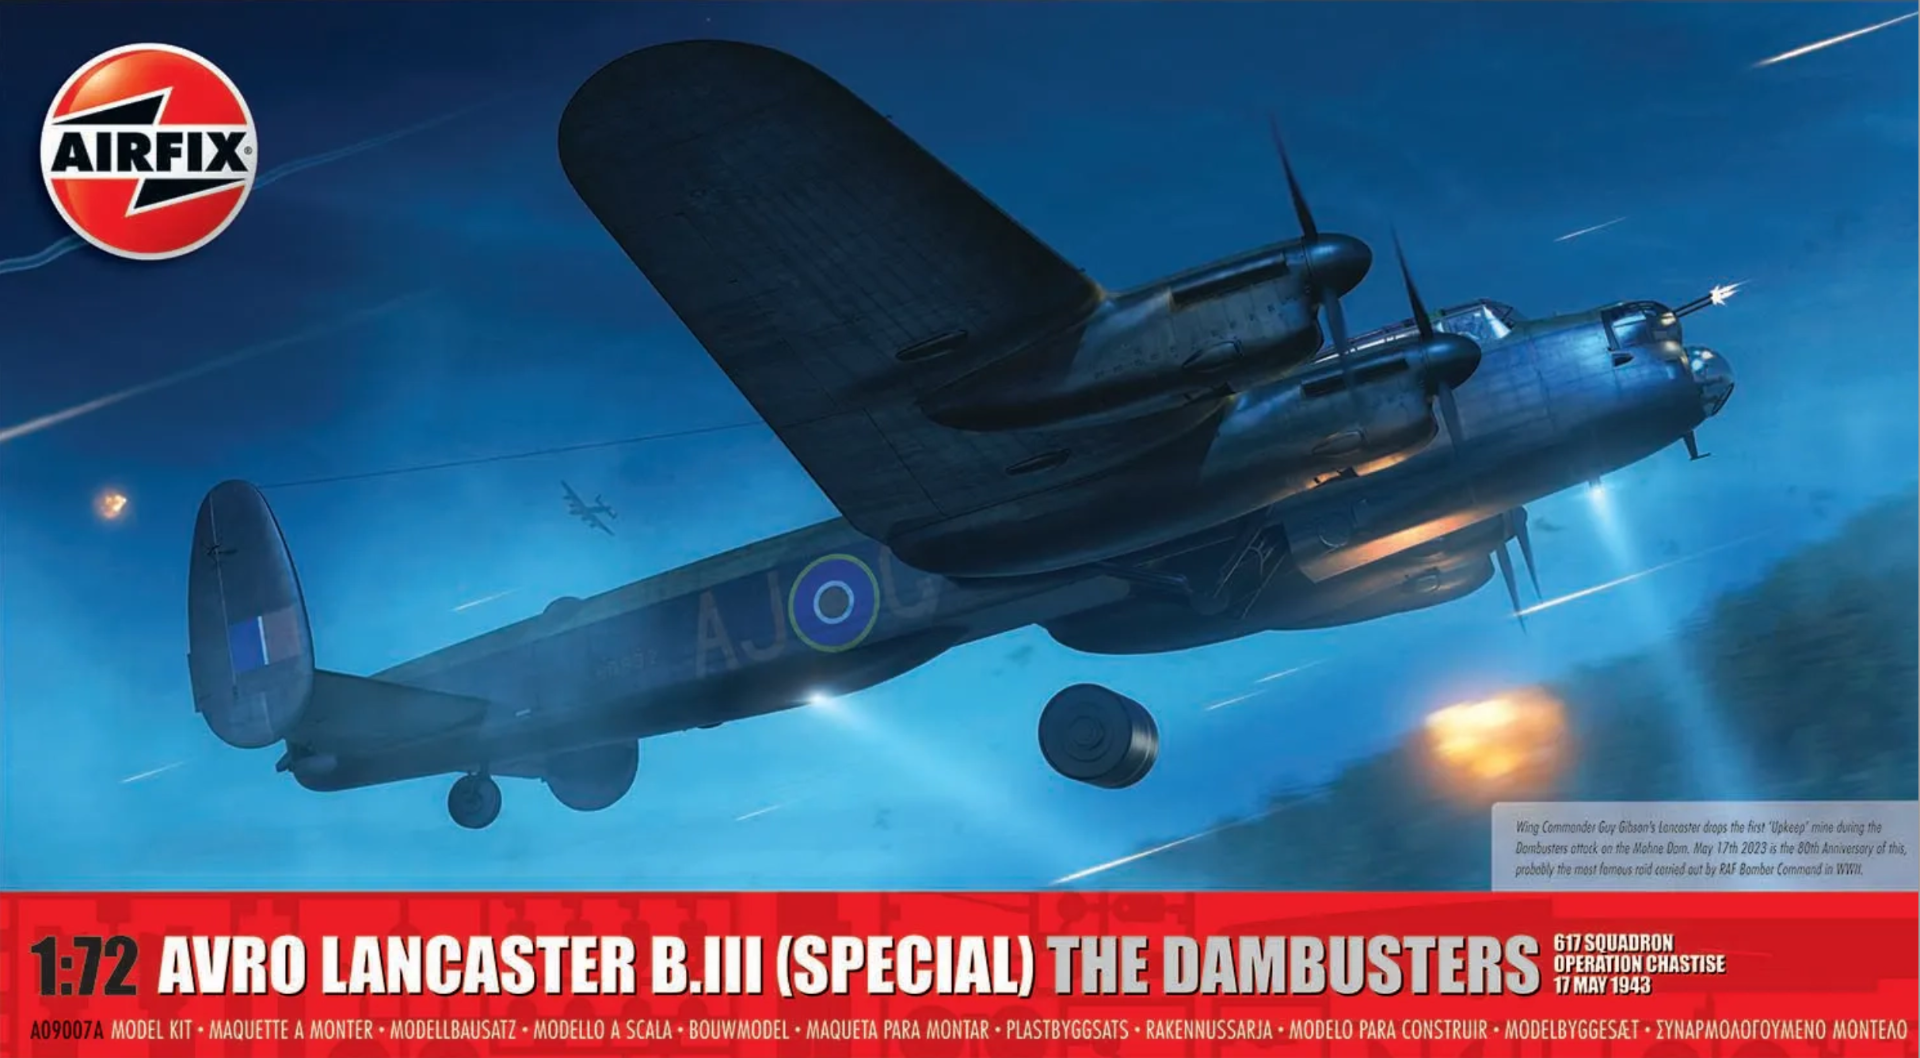 Airfix 1/72 Scale Avro Lancaster B.III (Special) 'The Dambusters' Model Kit